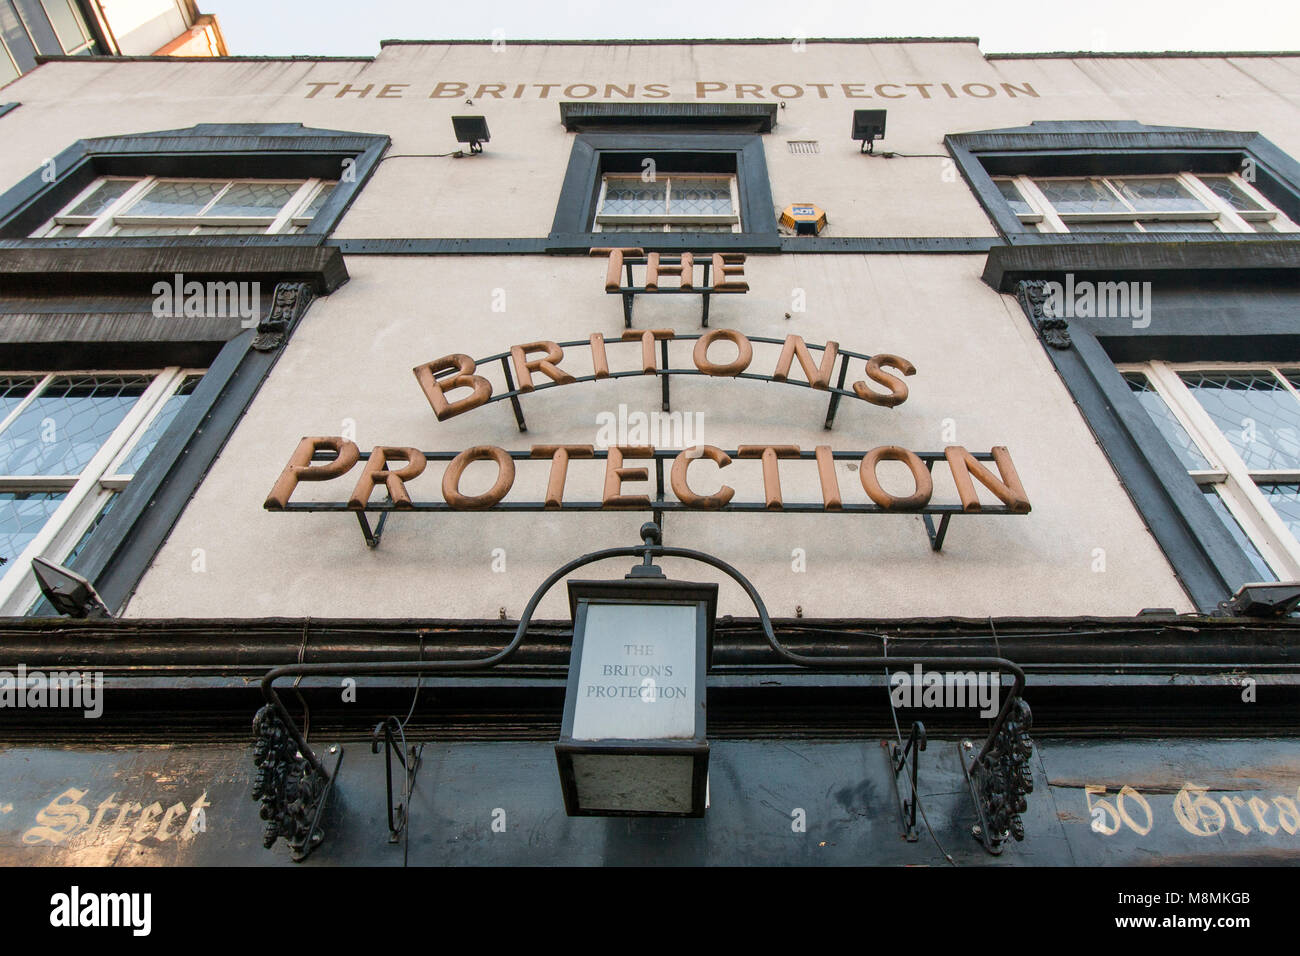 The Britons Protection, Manchester Stock Photo